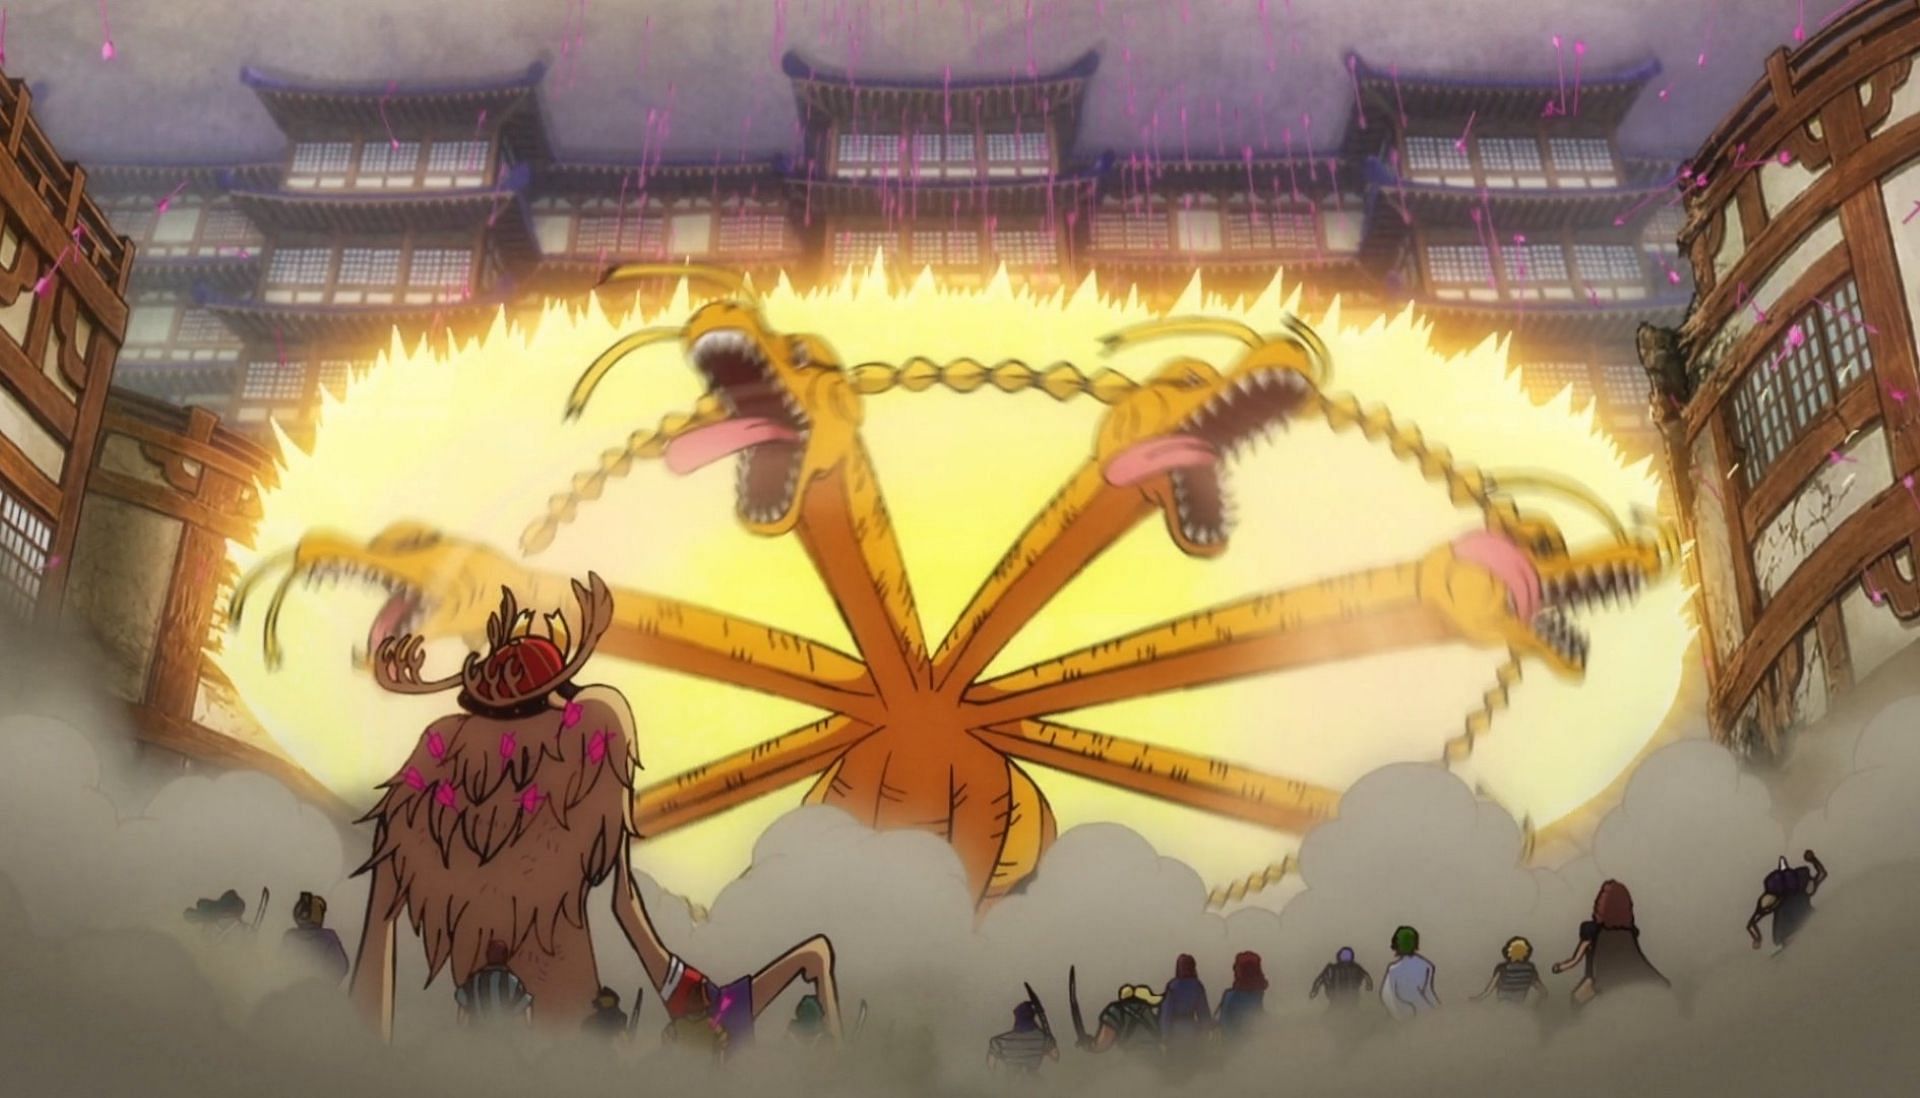 Queen spinning in One Piece episode 1036 (Image via Toei Animation)